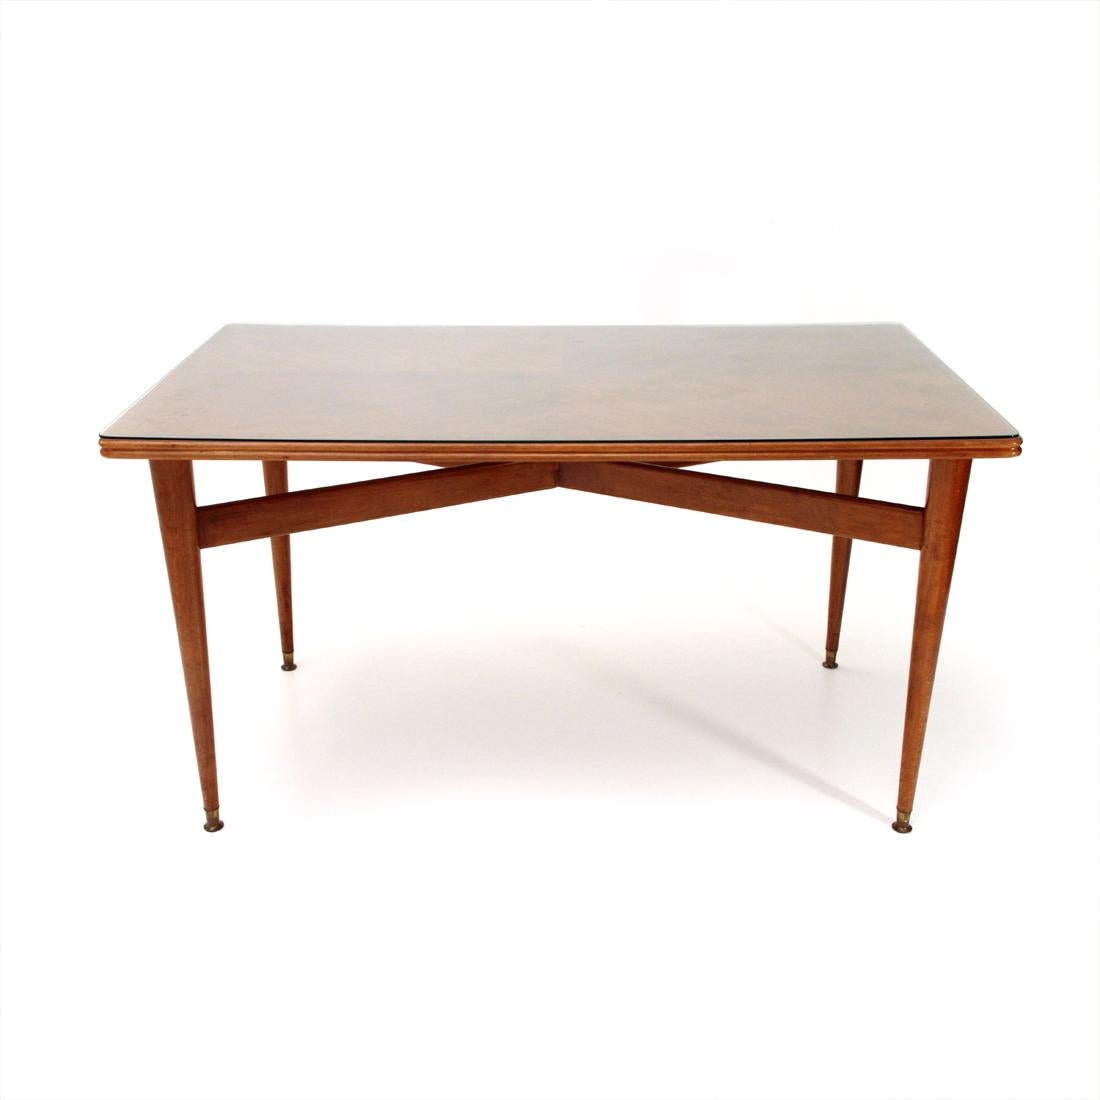 Italian manufacture table from the 1950s.
Veneered wood top with protective glass.
Conical legs in solid wood with crossbars.
Feet in brass.
Good general conditions, some signs due to normal use over time.

Dimensions: Length 151 cm - Depth 87